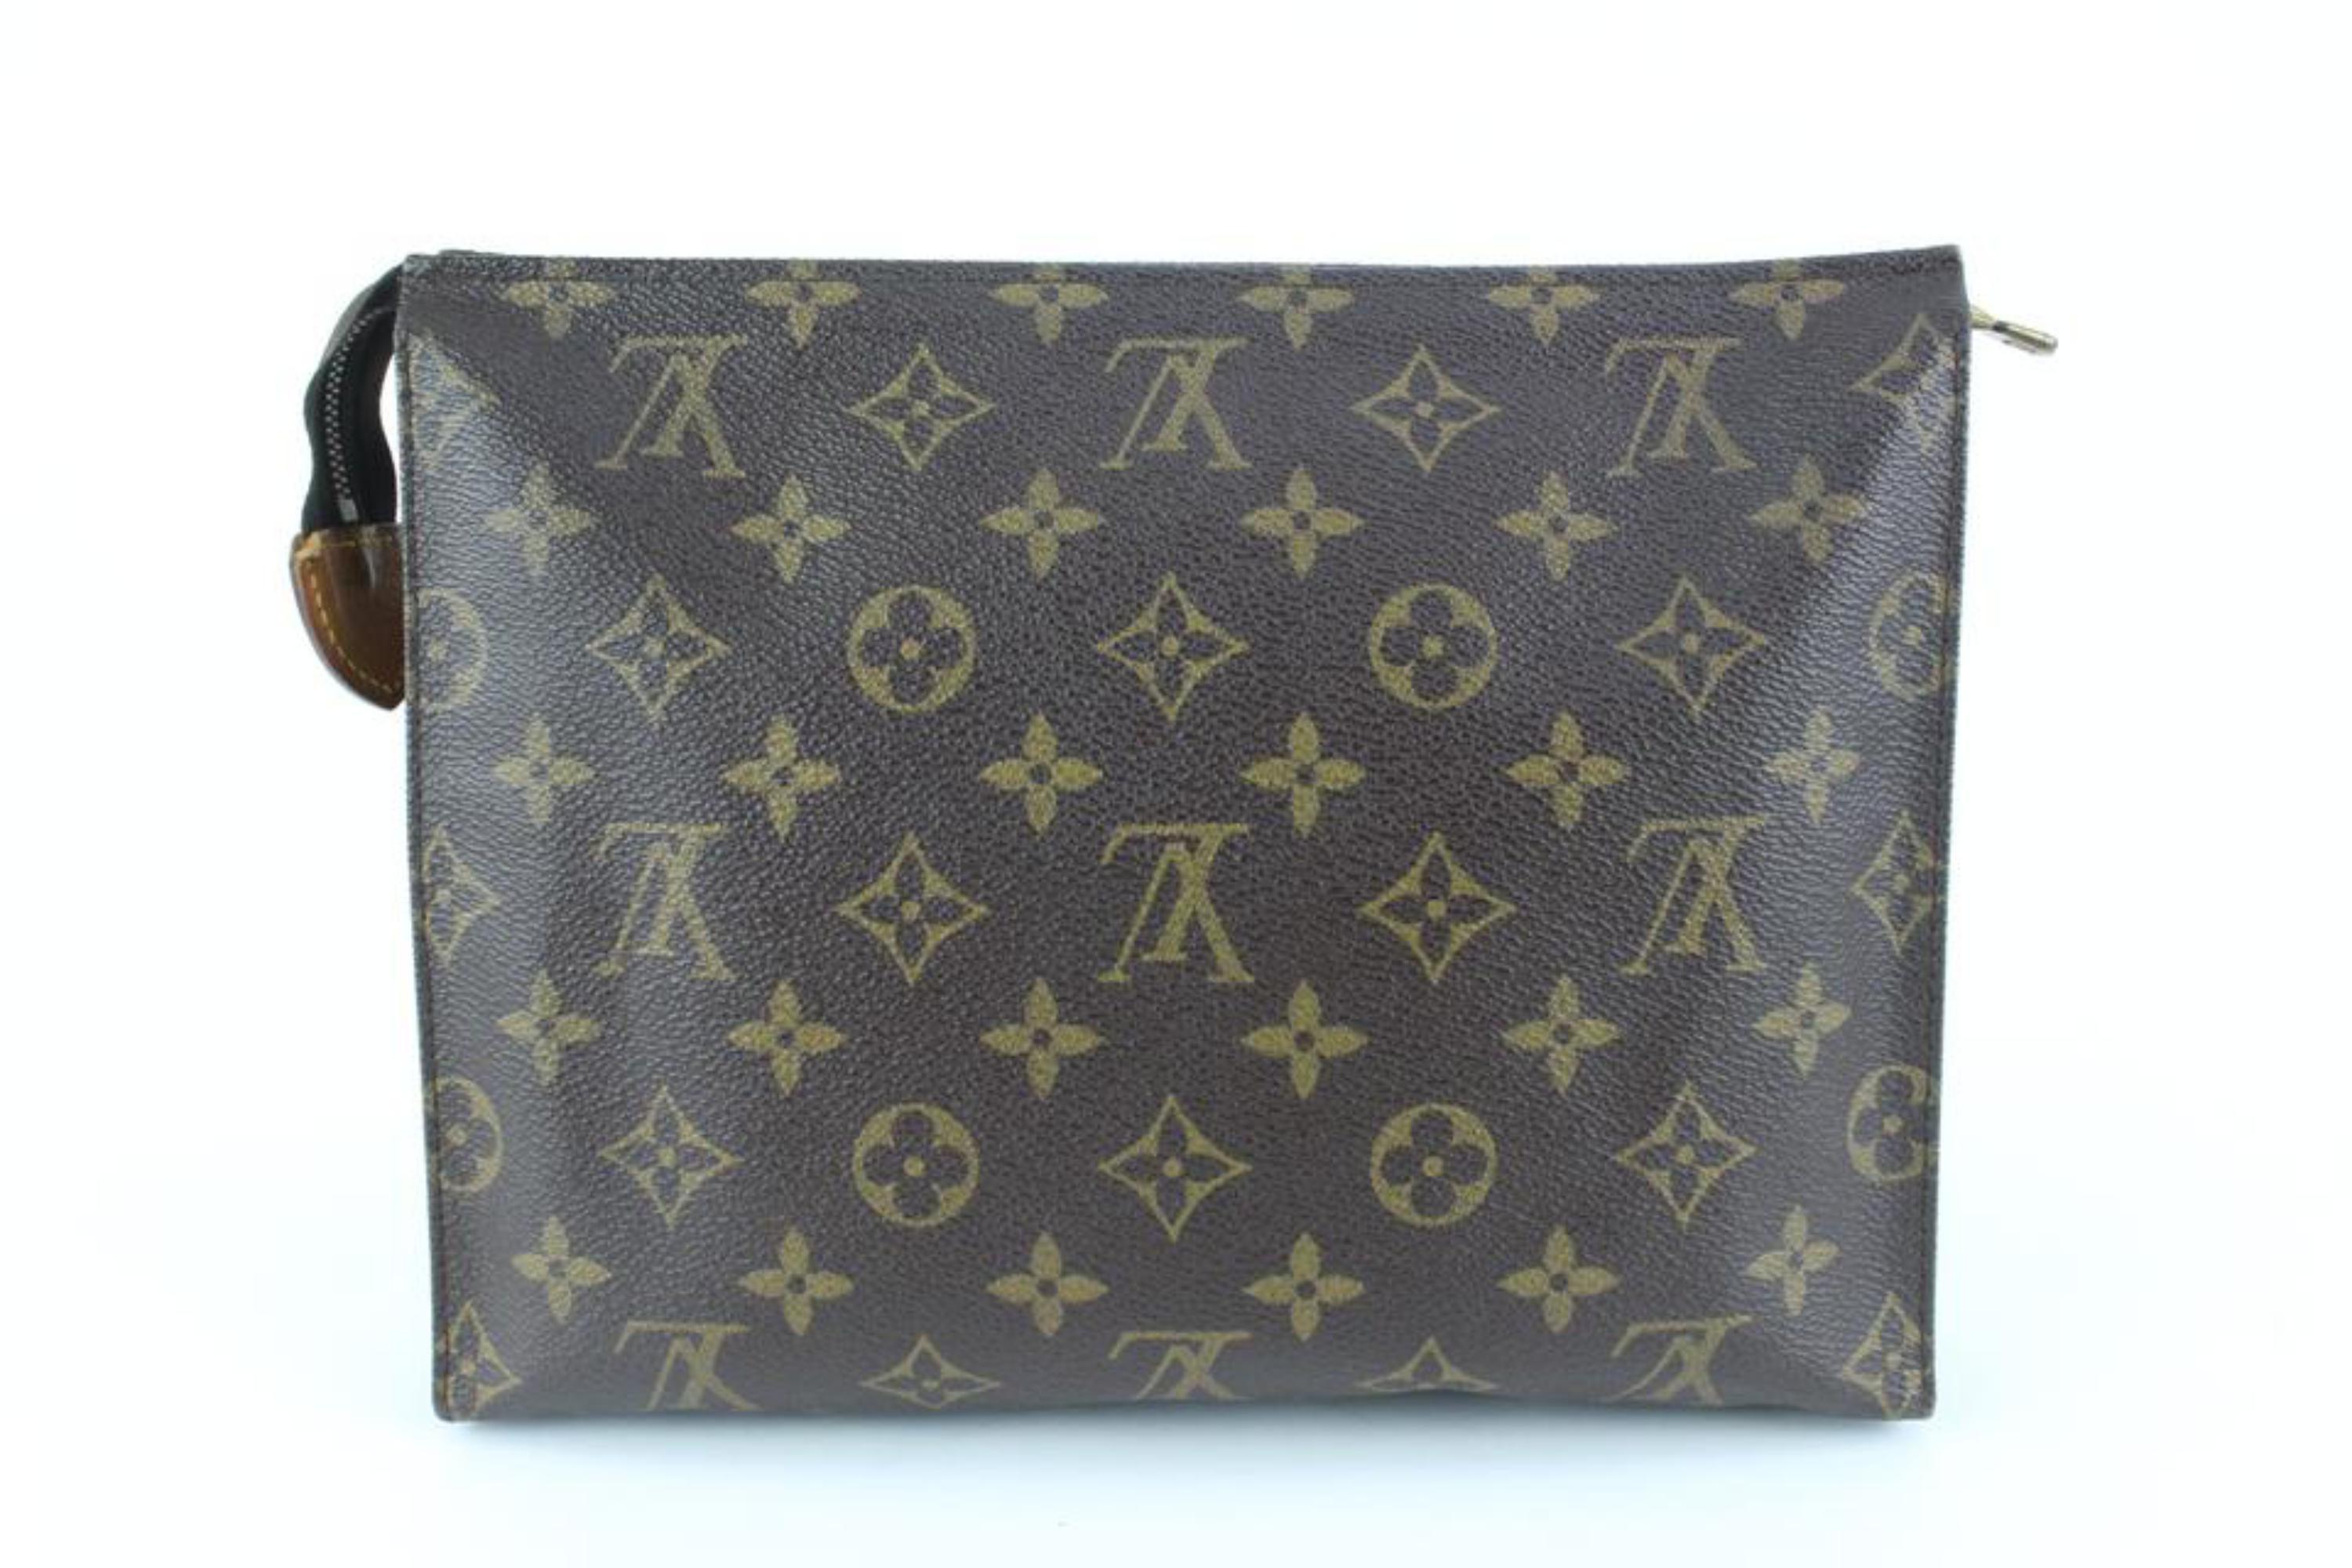 Louis Vuitton Discontinued Monogram Toiletry Pouch 26 Poche Toilette 112lv39 In Good Condition For Sale In Dix hills, NY